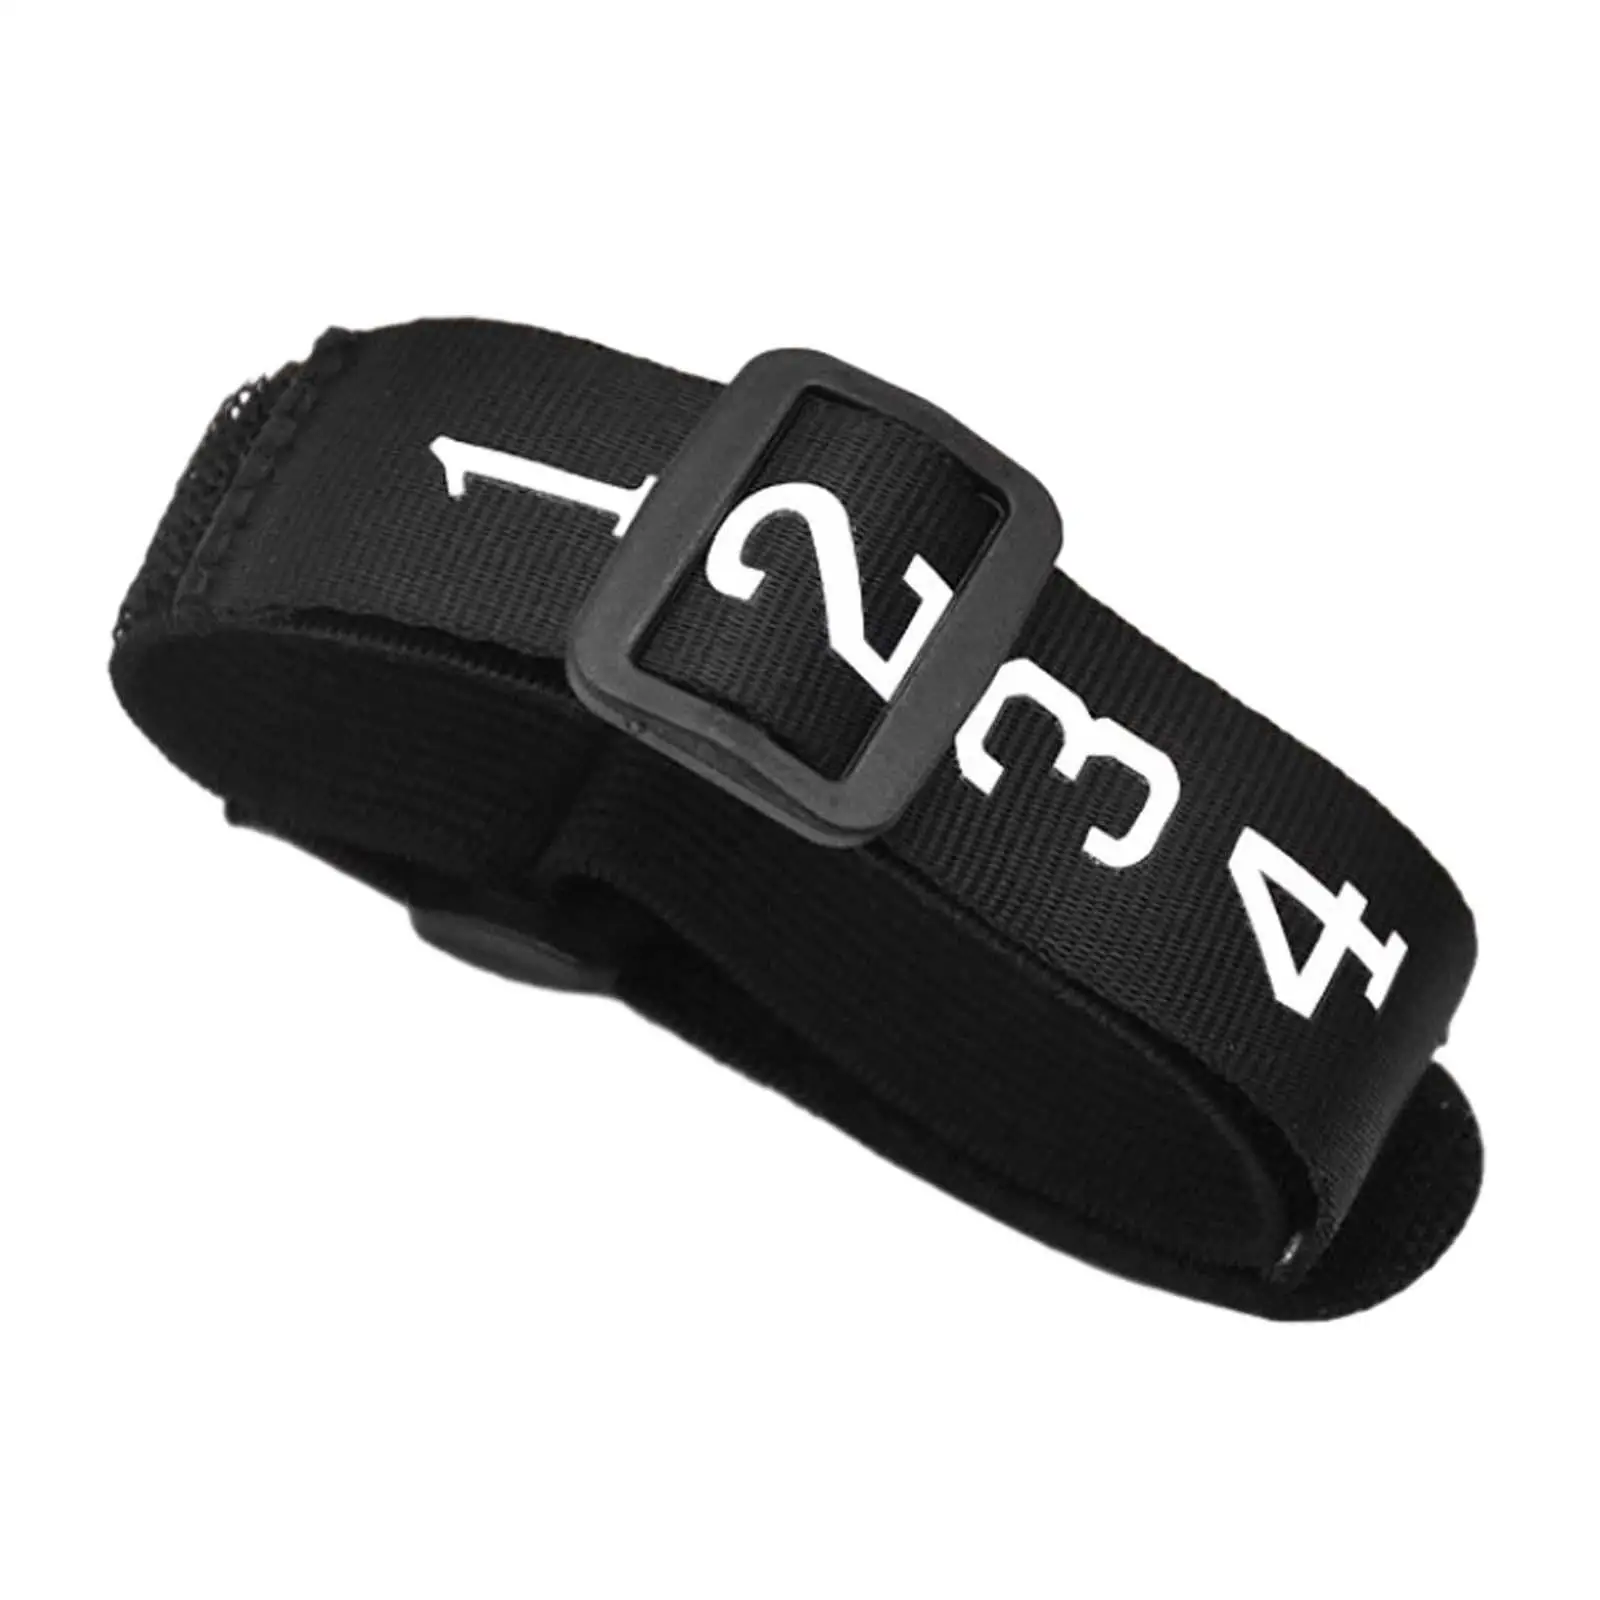 Football Numbered Wrist Down Indicator Football Referee Gear Referee Wristband Accessories for Referee Officials Teens Practice